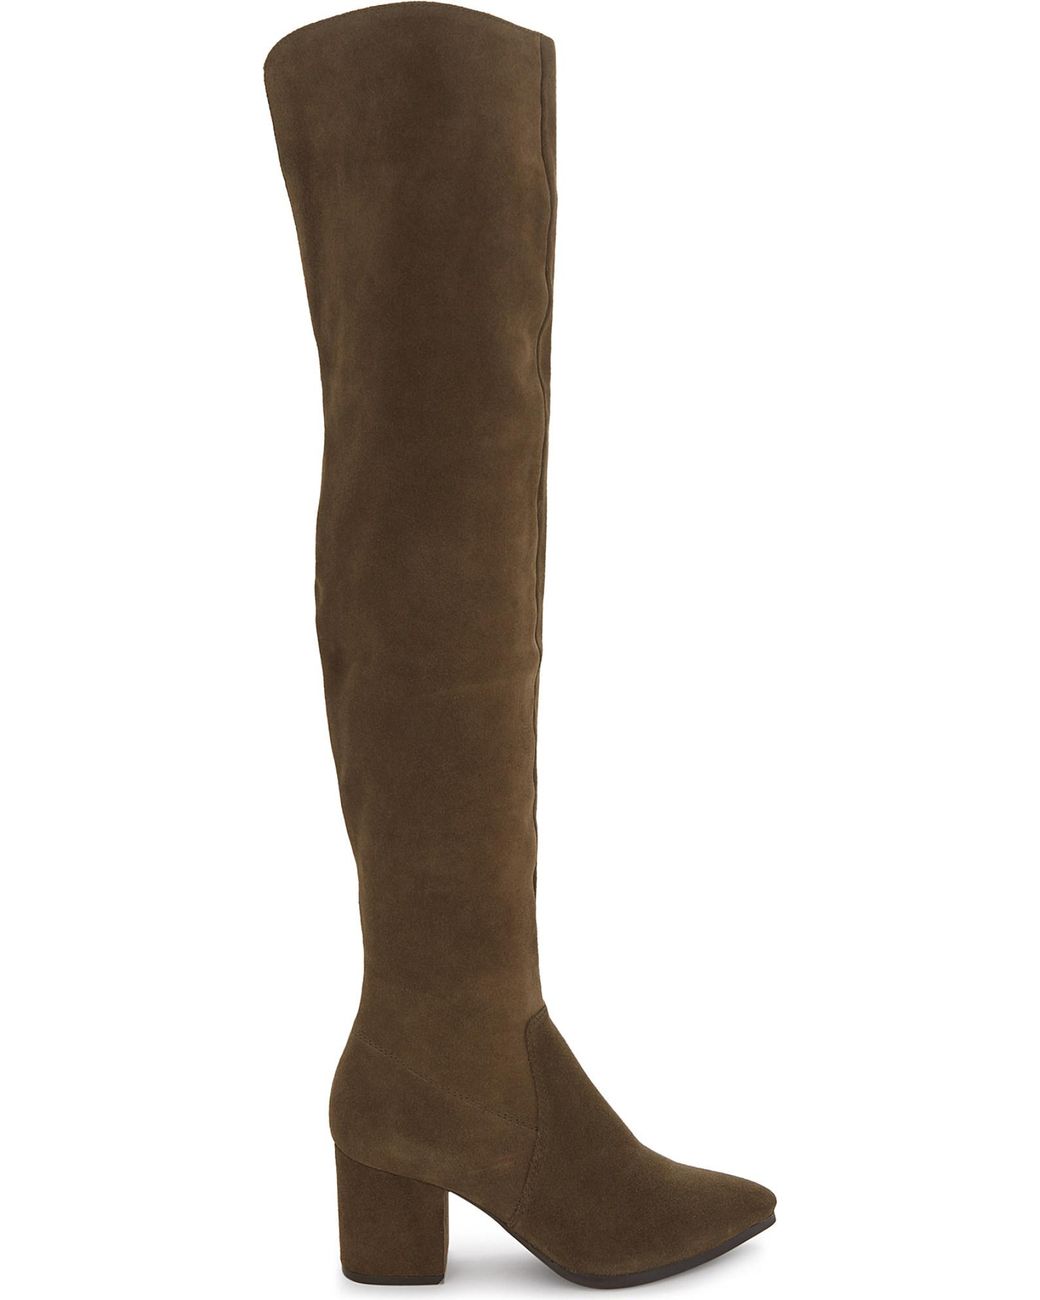 ALDO Suede Over-the-knee Boots in Natural | Lyst